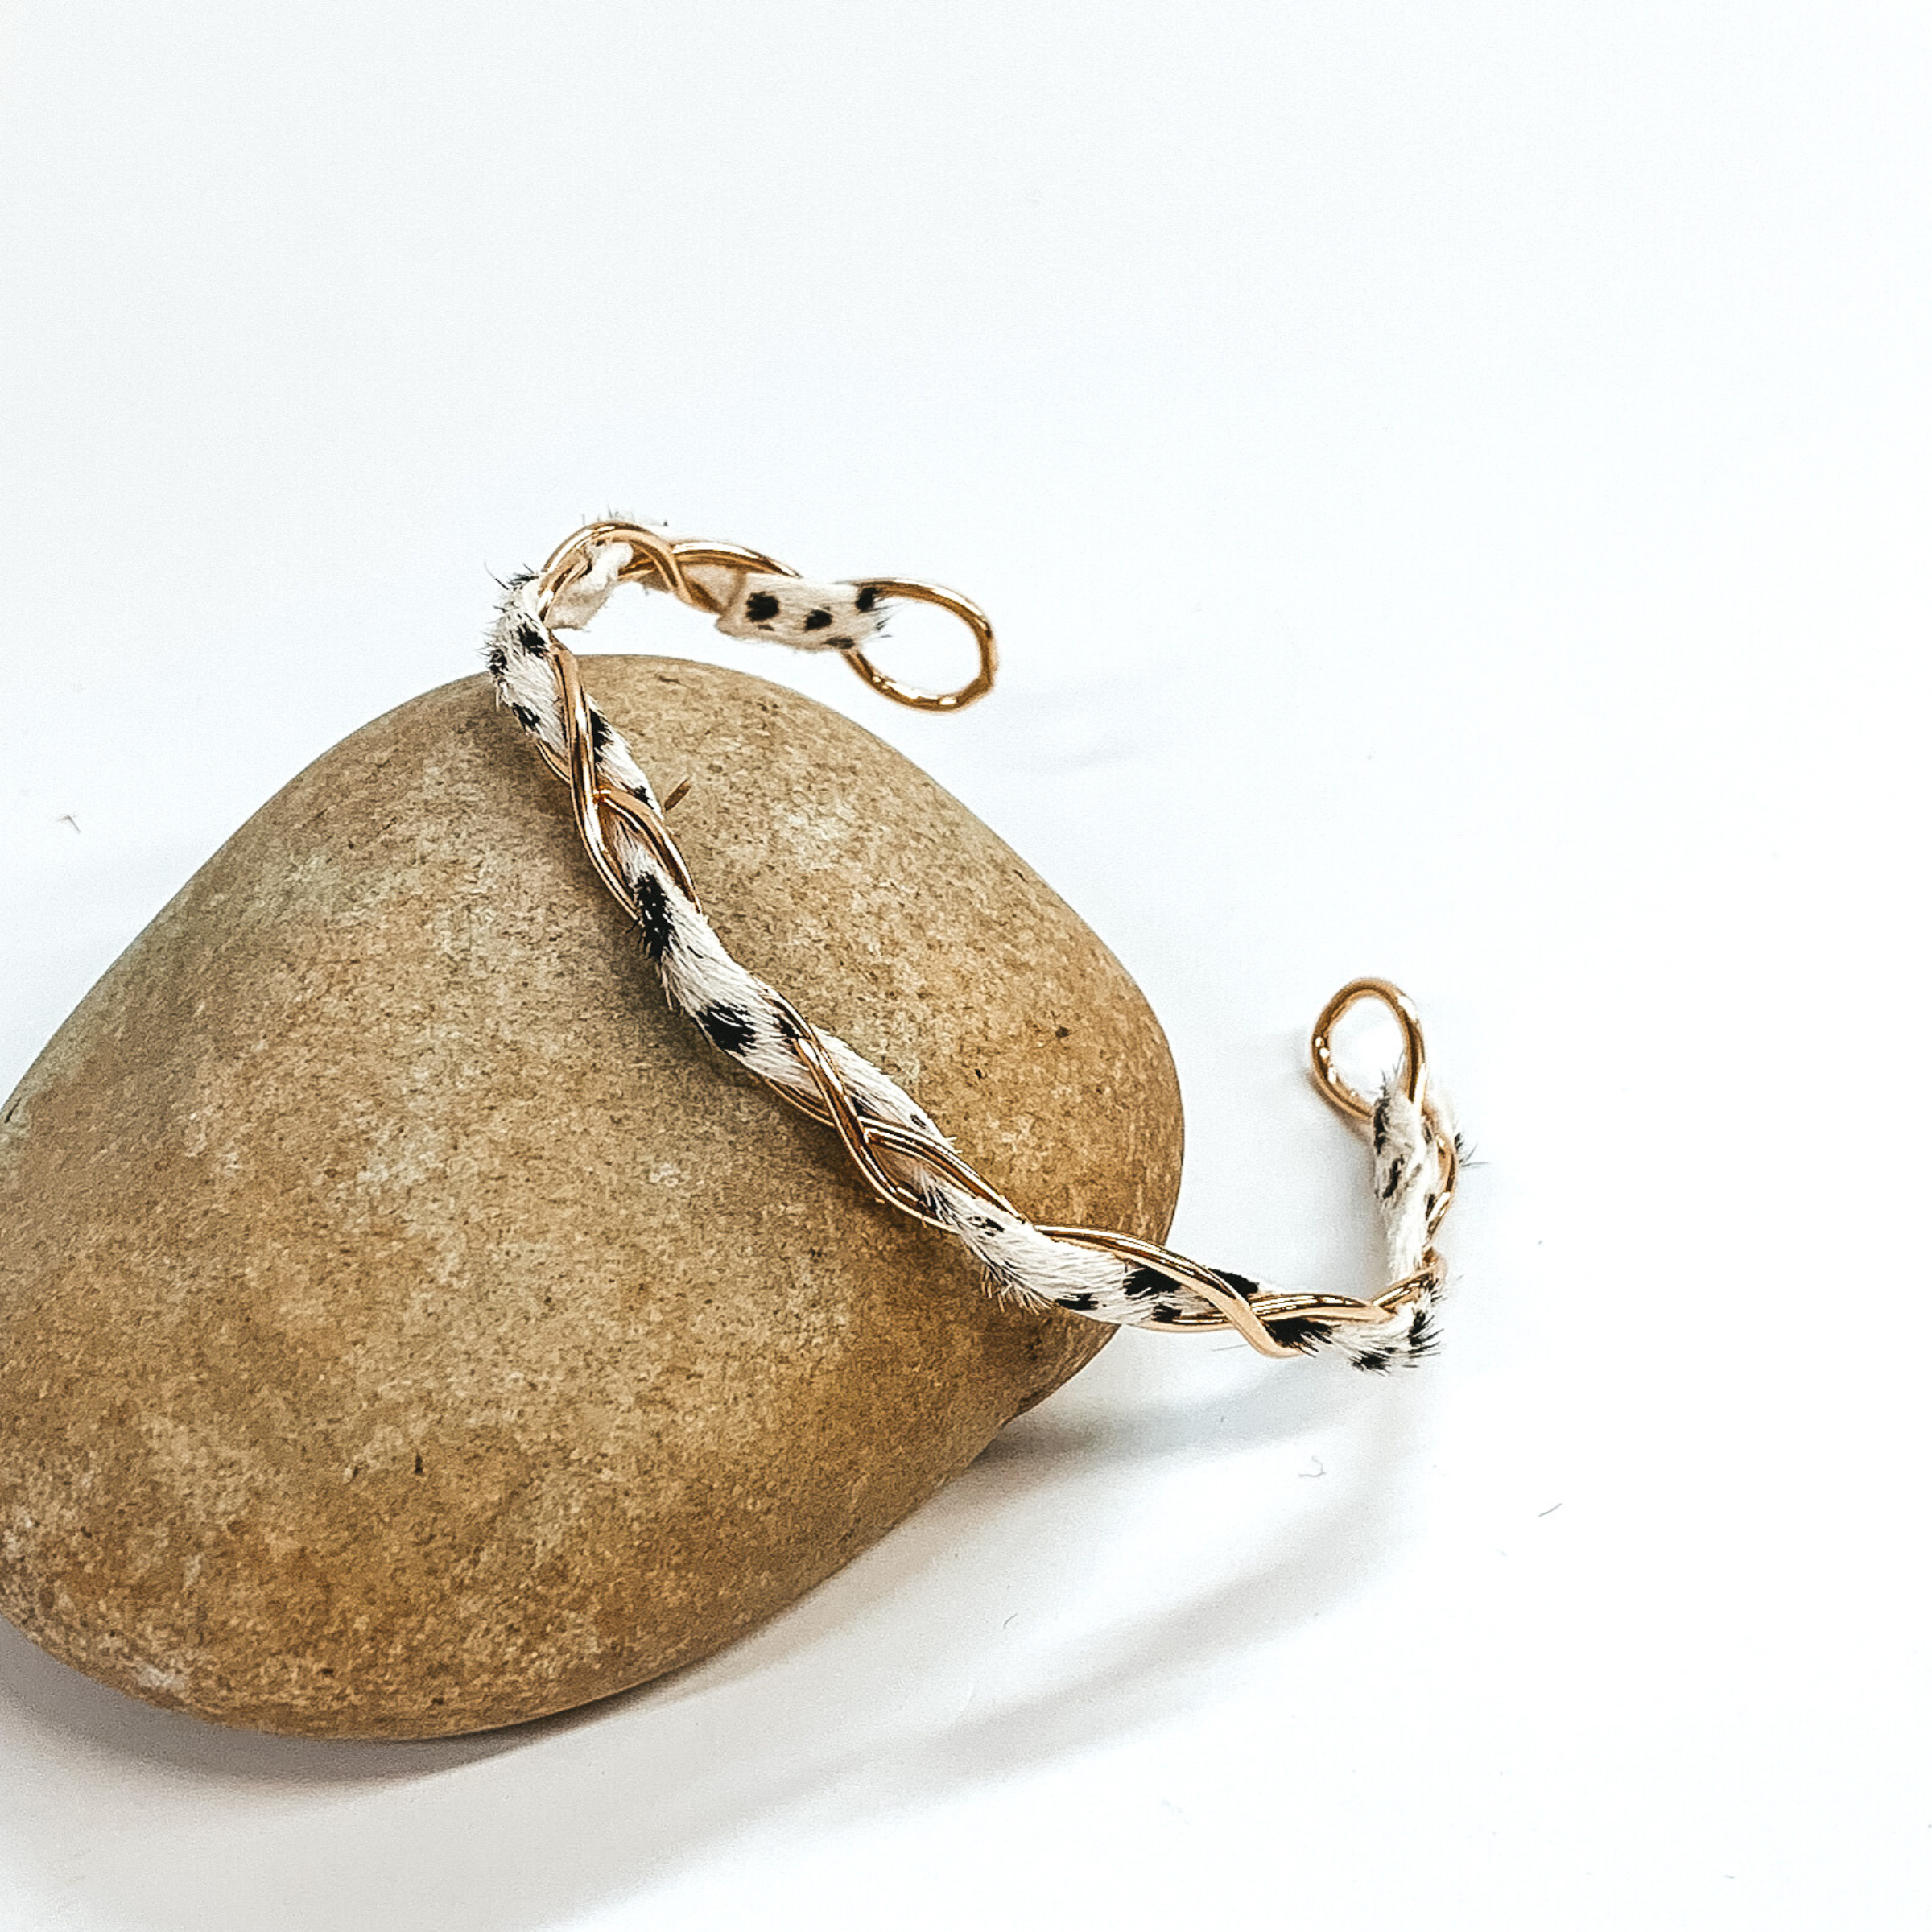 Gold twisted wire bracelet with faux fur inlay in a white dalmatian print. This bracelet is pictured laying against a rock on a white background.